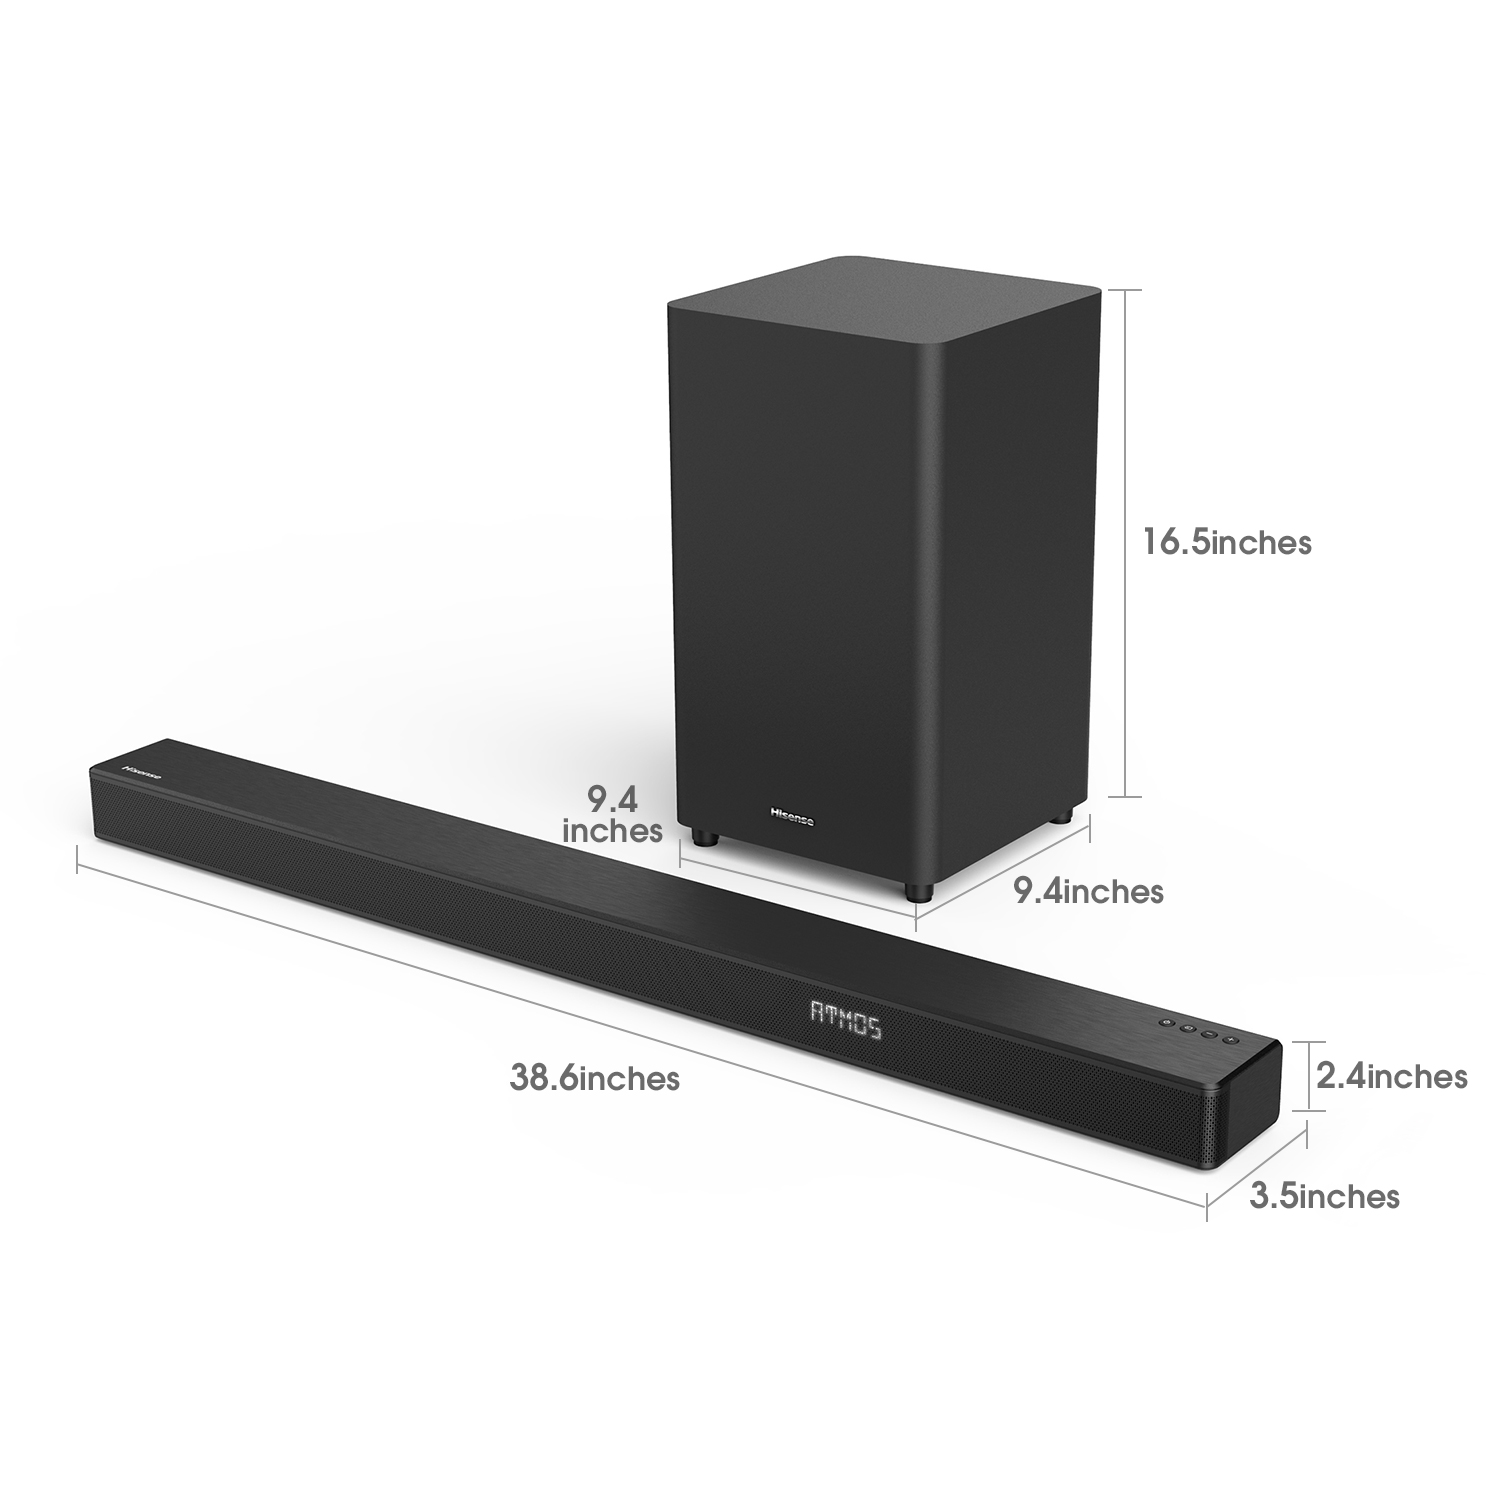 Hisense HS312 3.1ch Sound Bar with Wireless Subwoofer, 300W, Dolby Atmos, 4K Pass-Through, Cinematic Experience, One Remote Contorl, Bluetooth, HDMI ARC/Optical/AUX/USB (Model HS312) Black - image 3 of 22